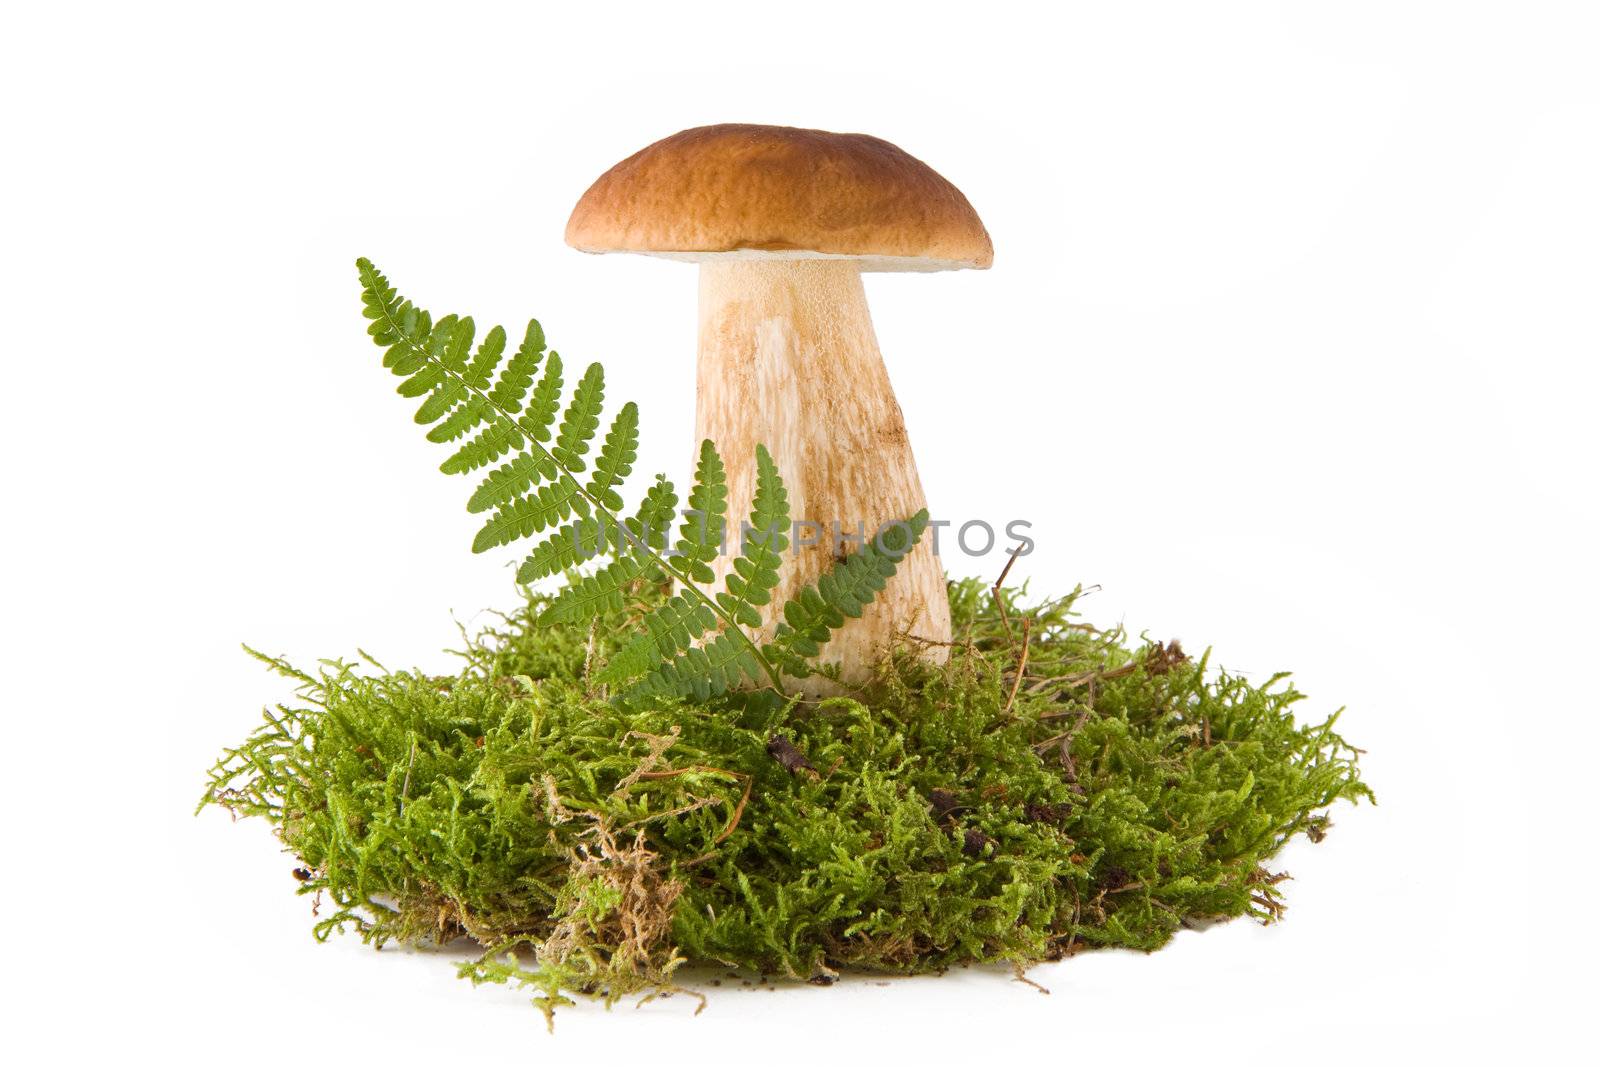 One fresh porcini mushroom in a green moss isolated on white